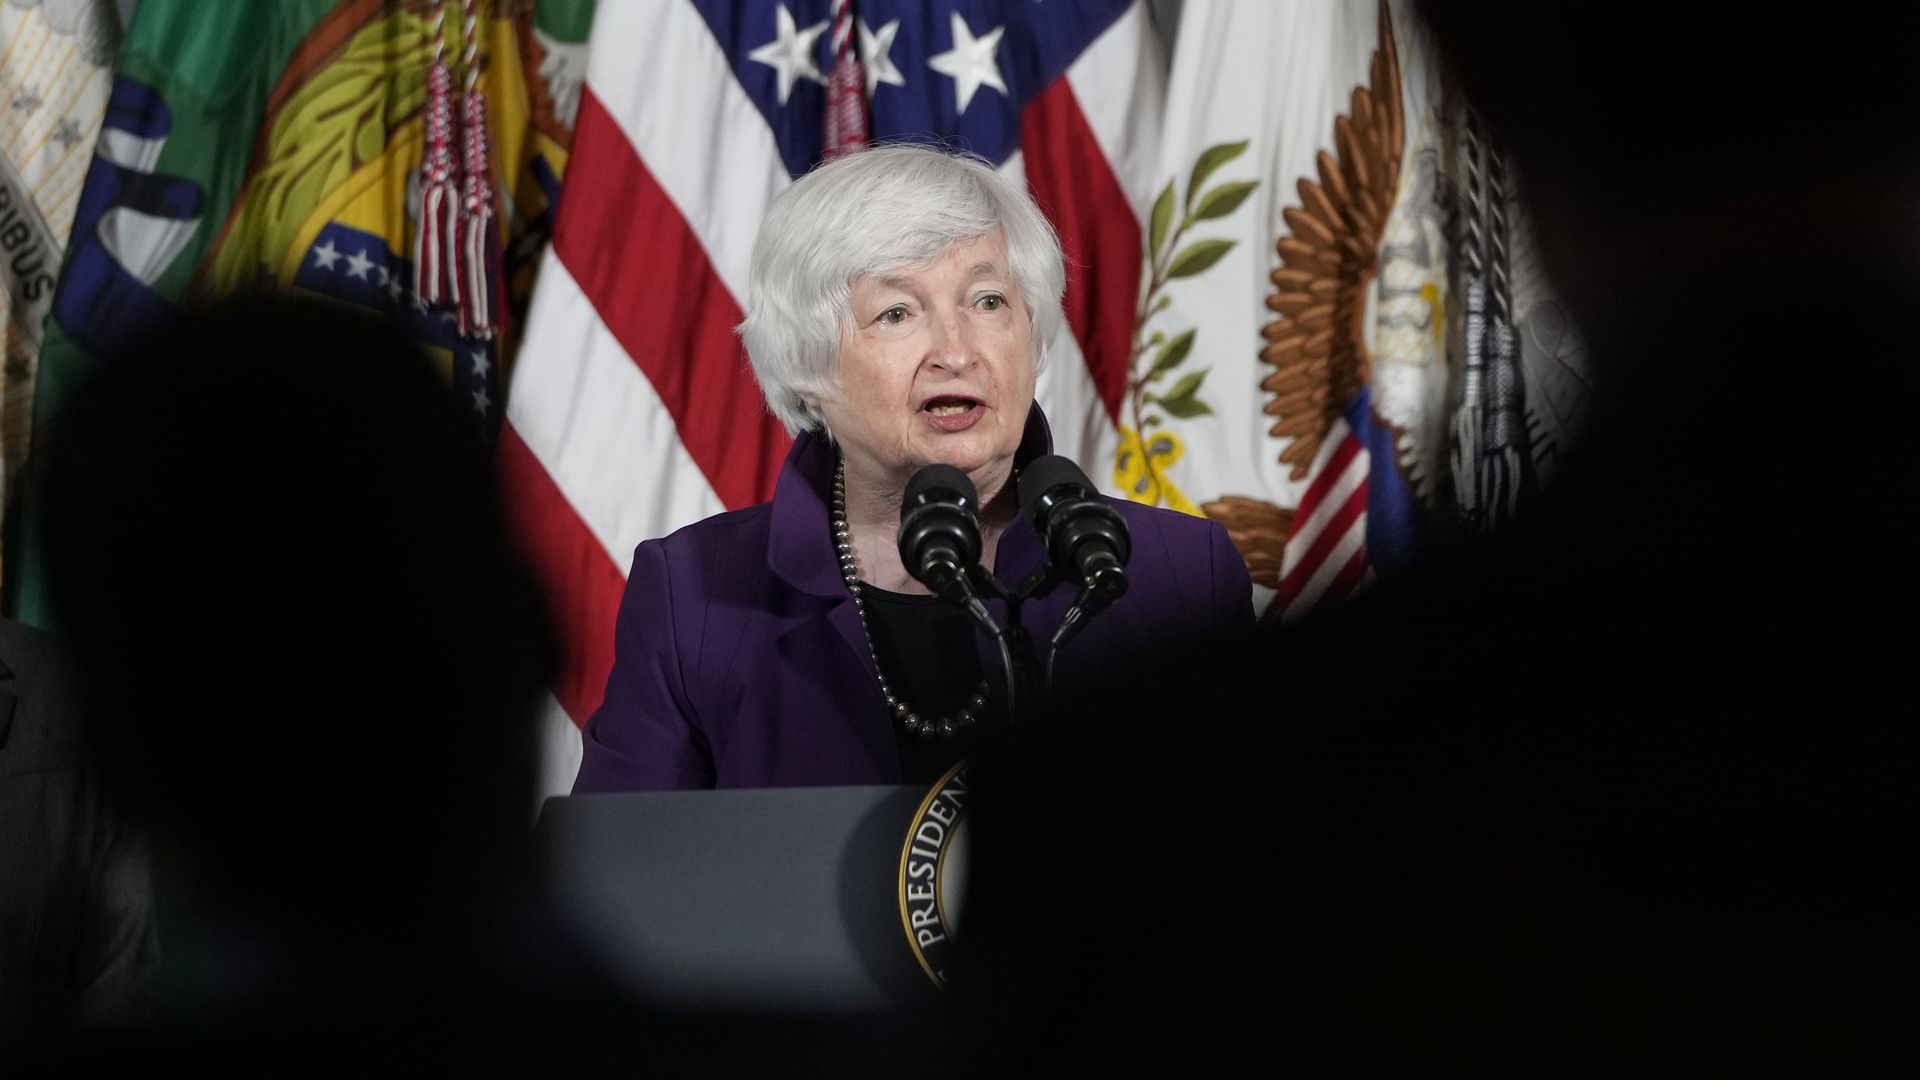 Treasury Secretary Janet Yellen speaks during an event at the U.S. Department of the Treasury on September 15, 2021 in Washington, DC. 